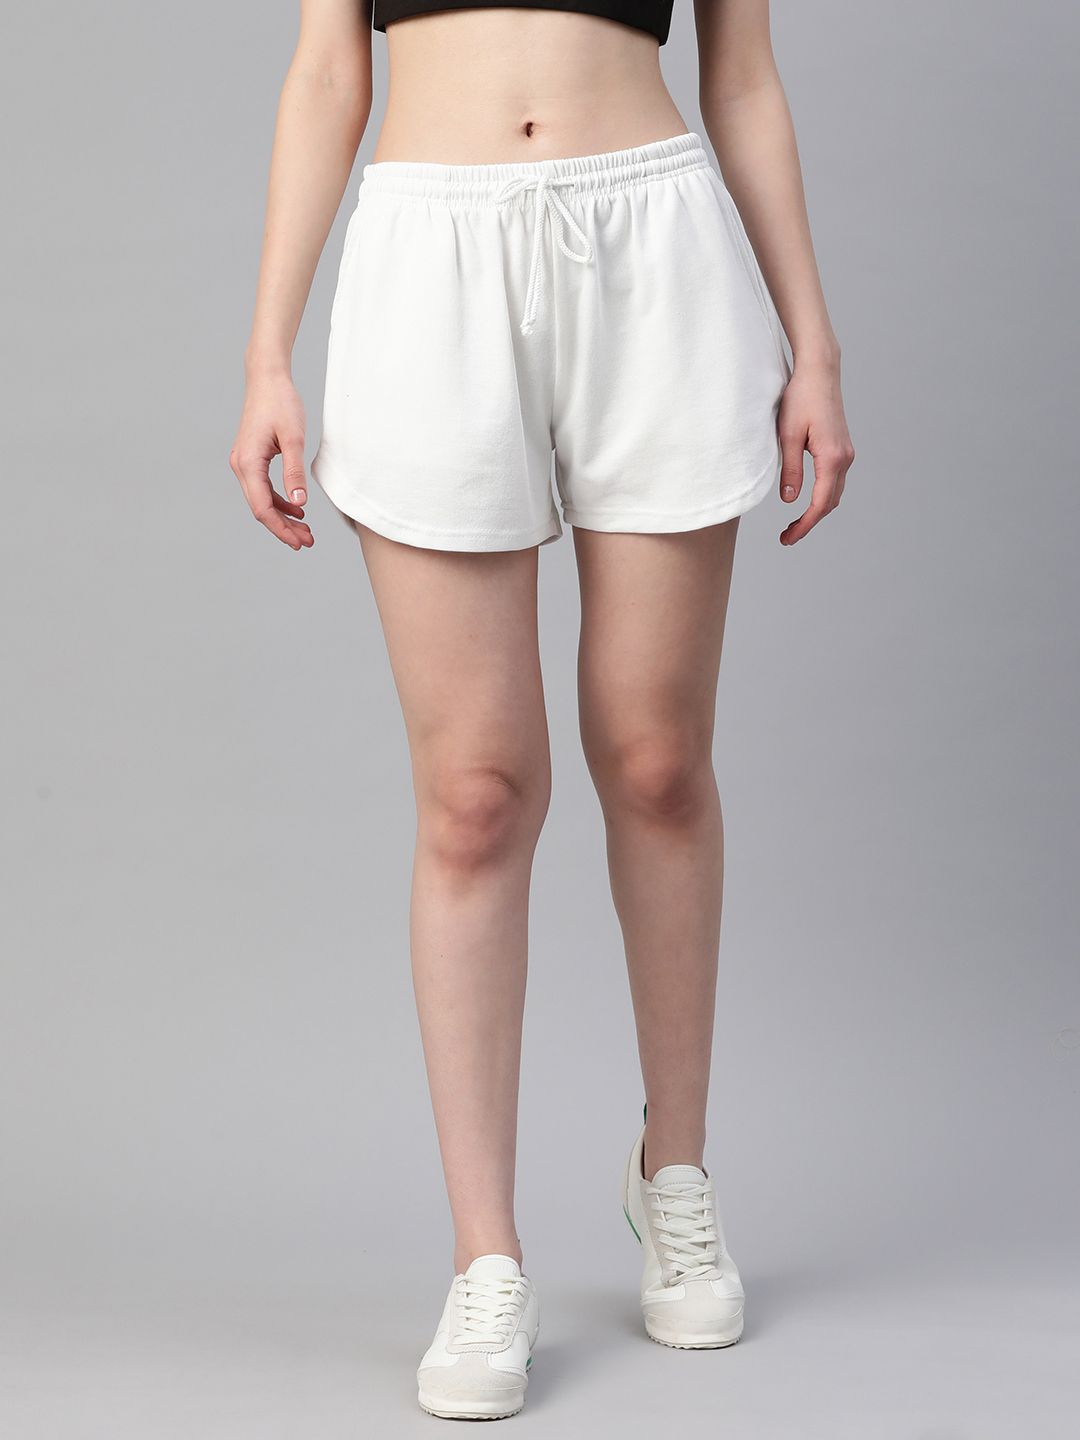 Laabha Outdoor Hot Pants Shorts Price in India